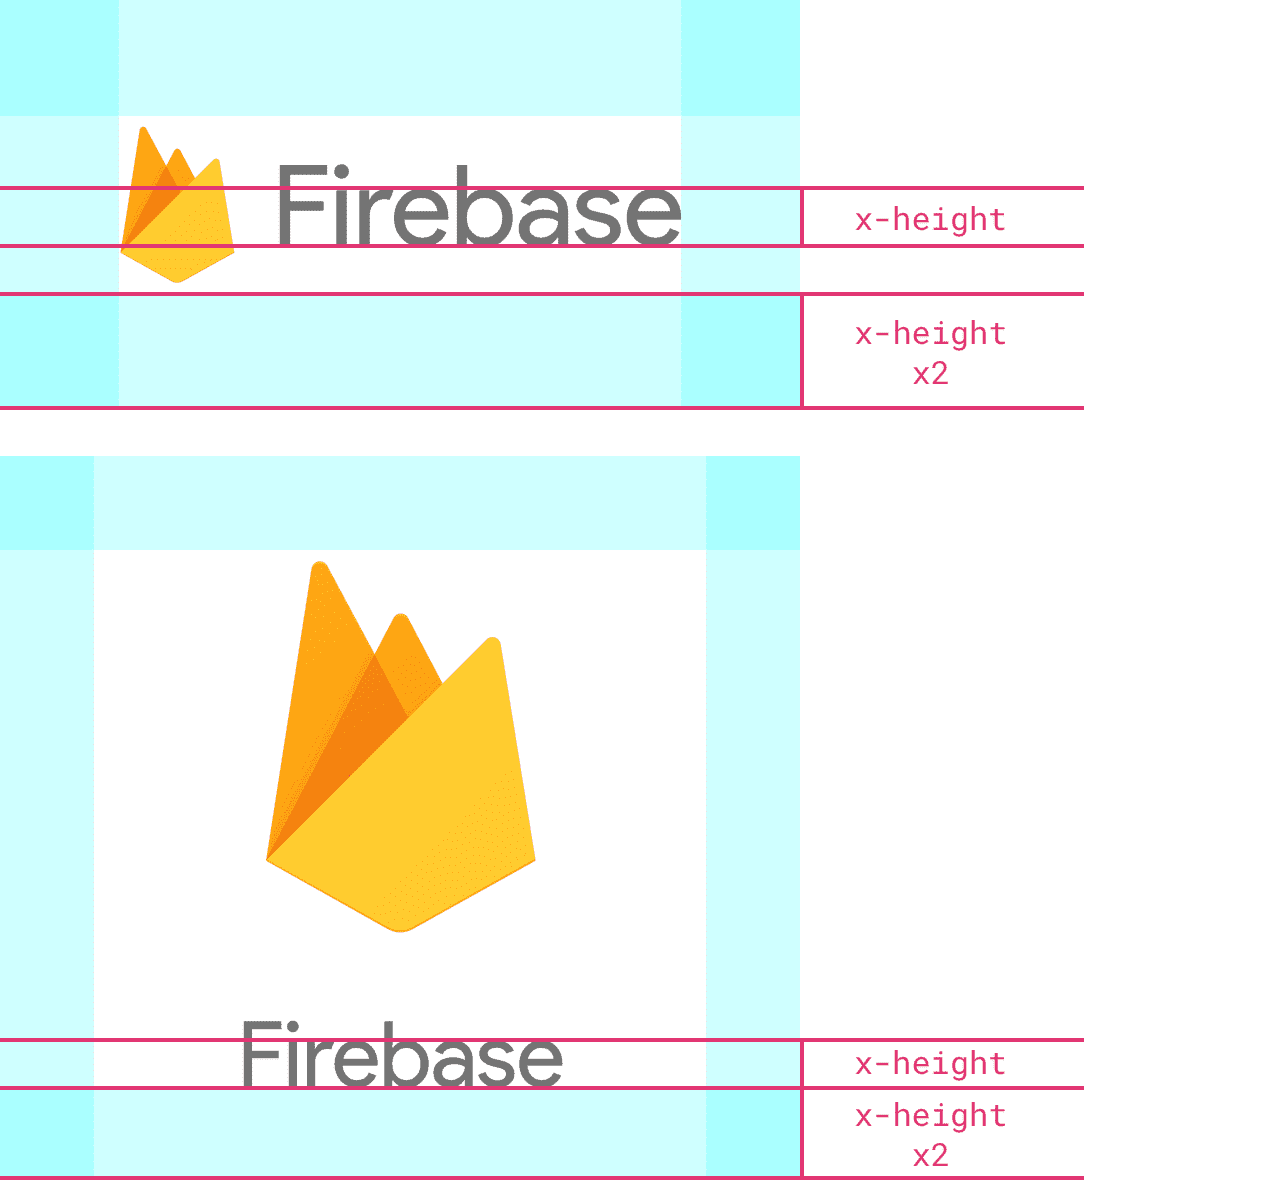 Firebase logo examples with at least twice the height of the logo